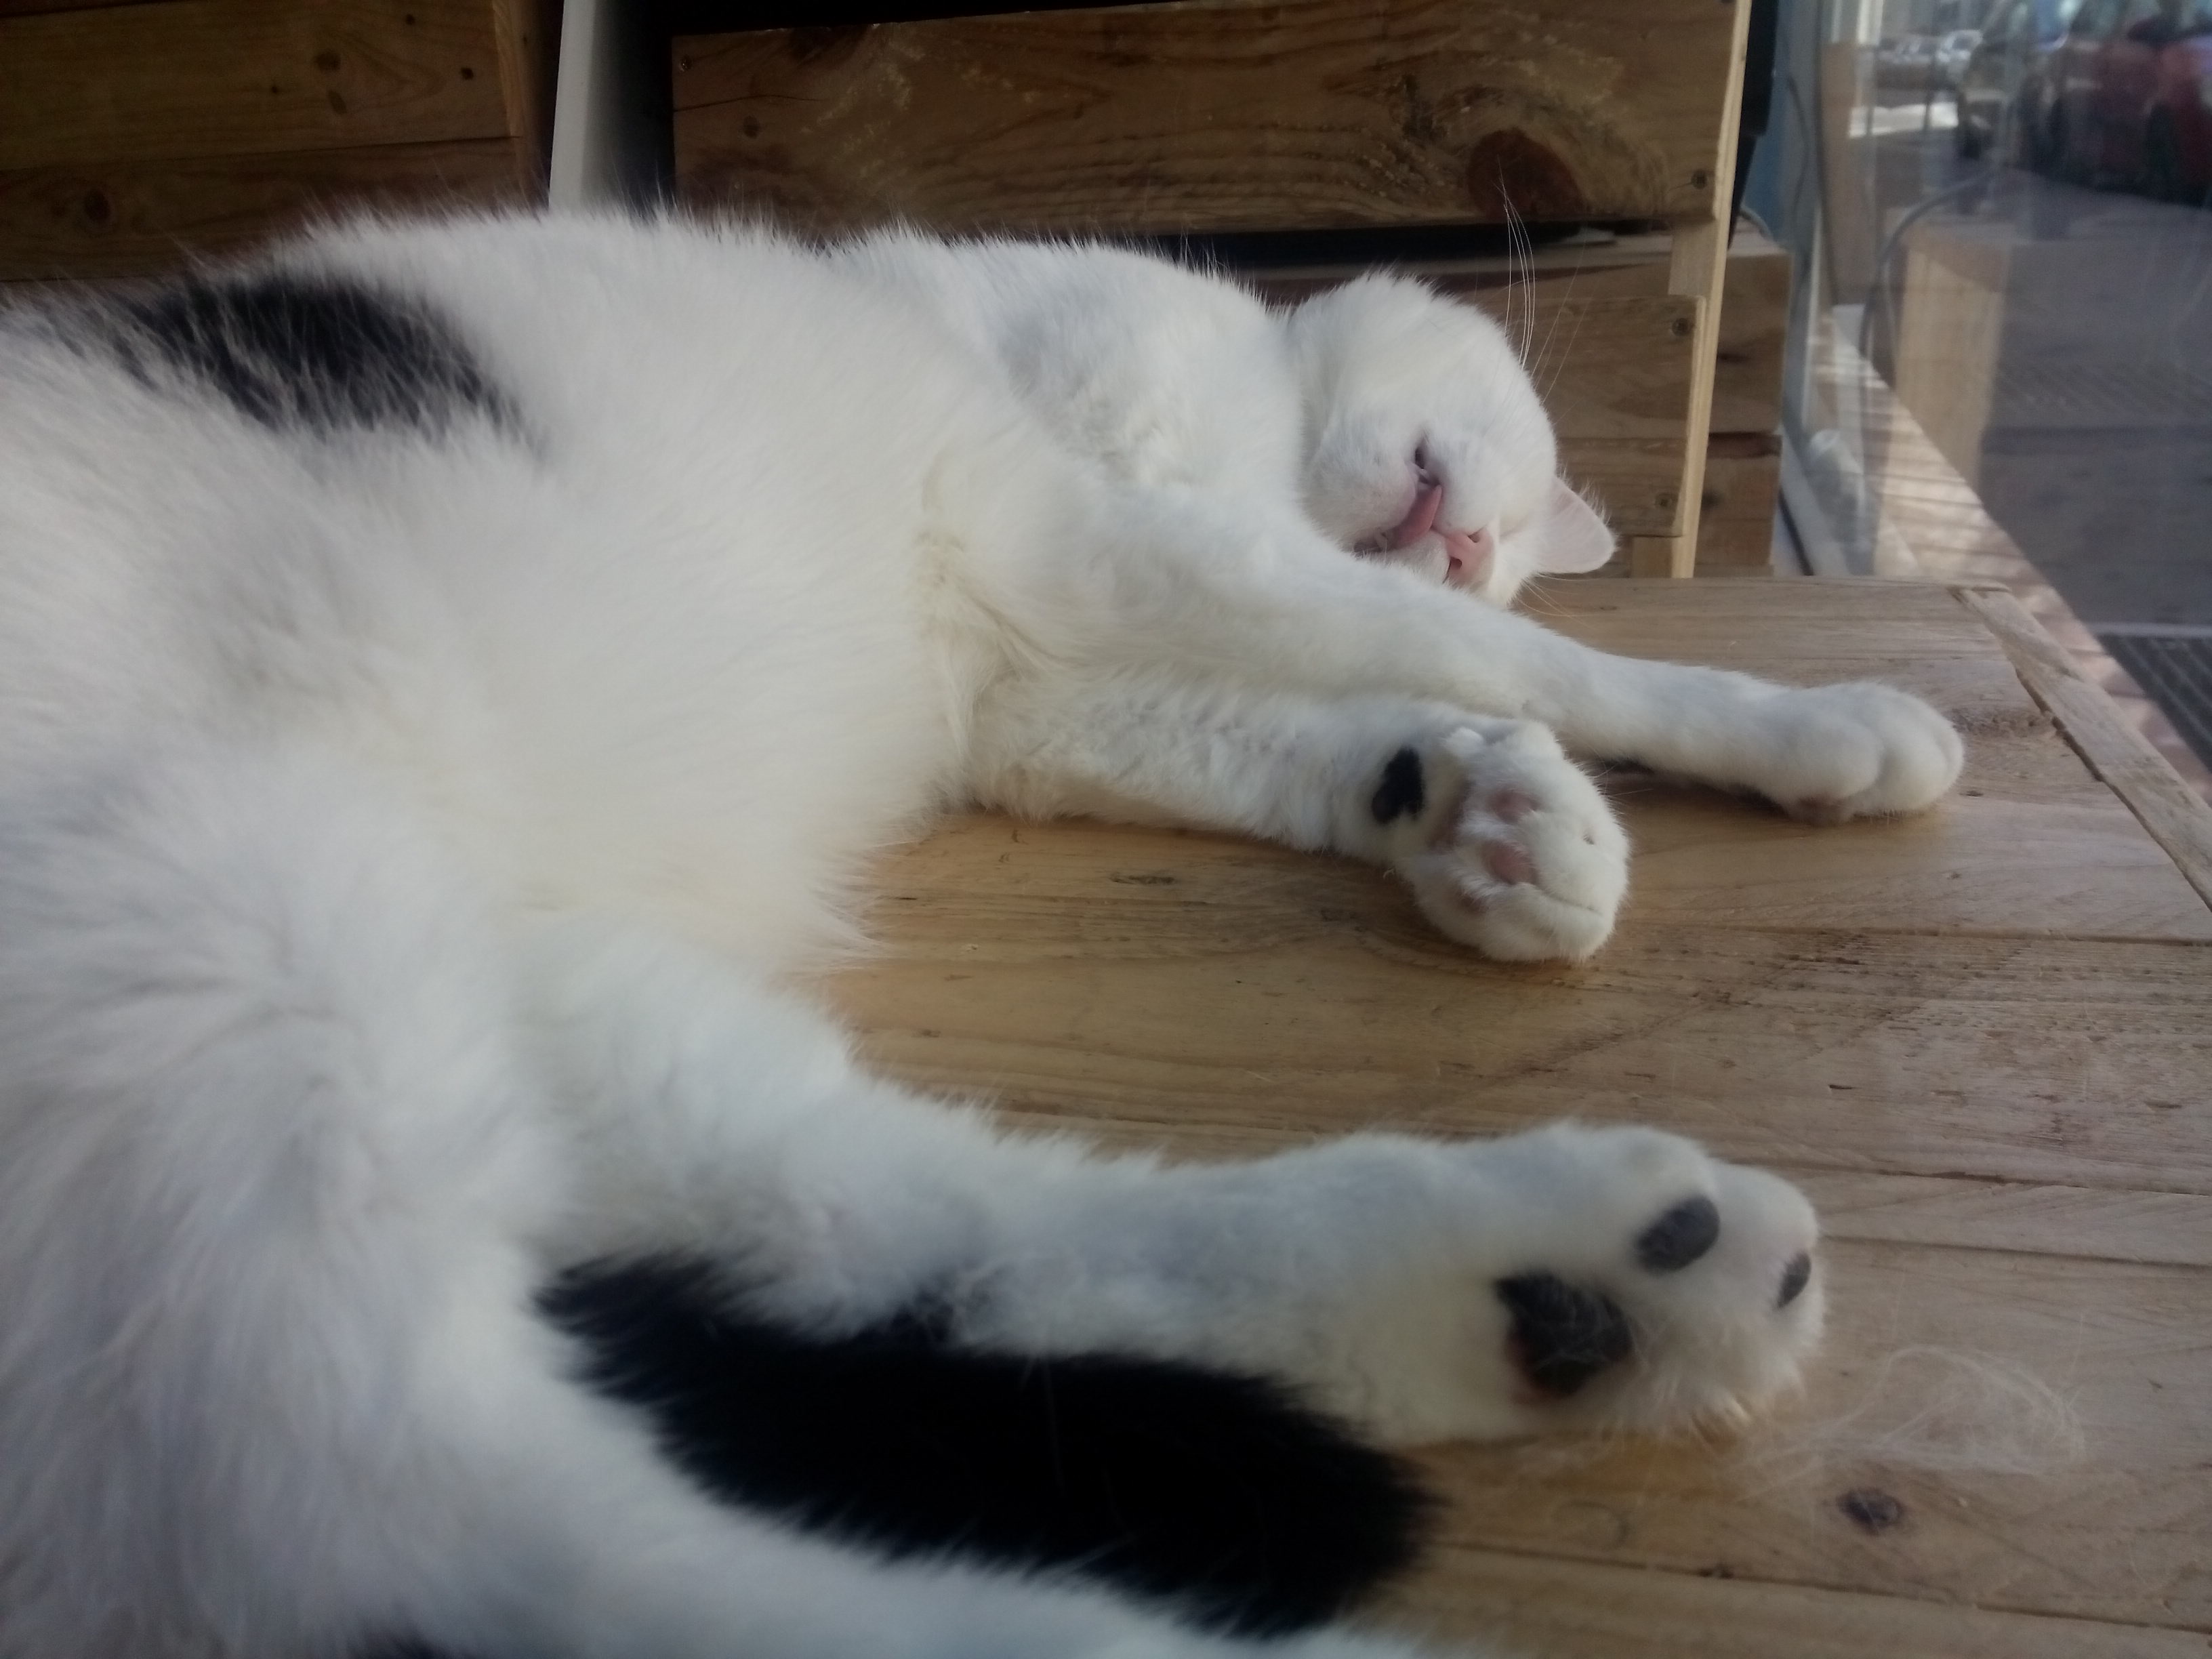 A black and white cat sleeps adorably sideways on a wooden table, aww her likkle paws